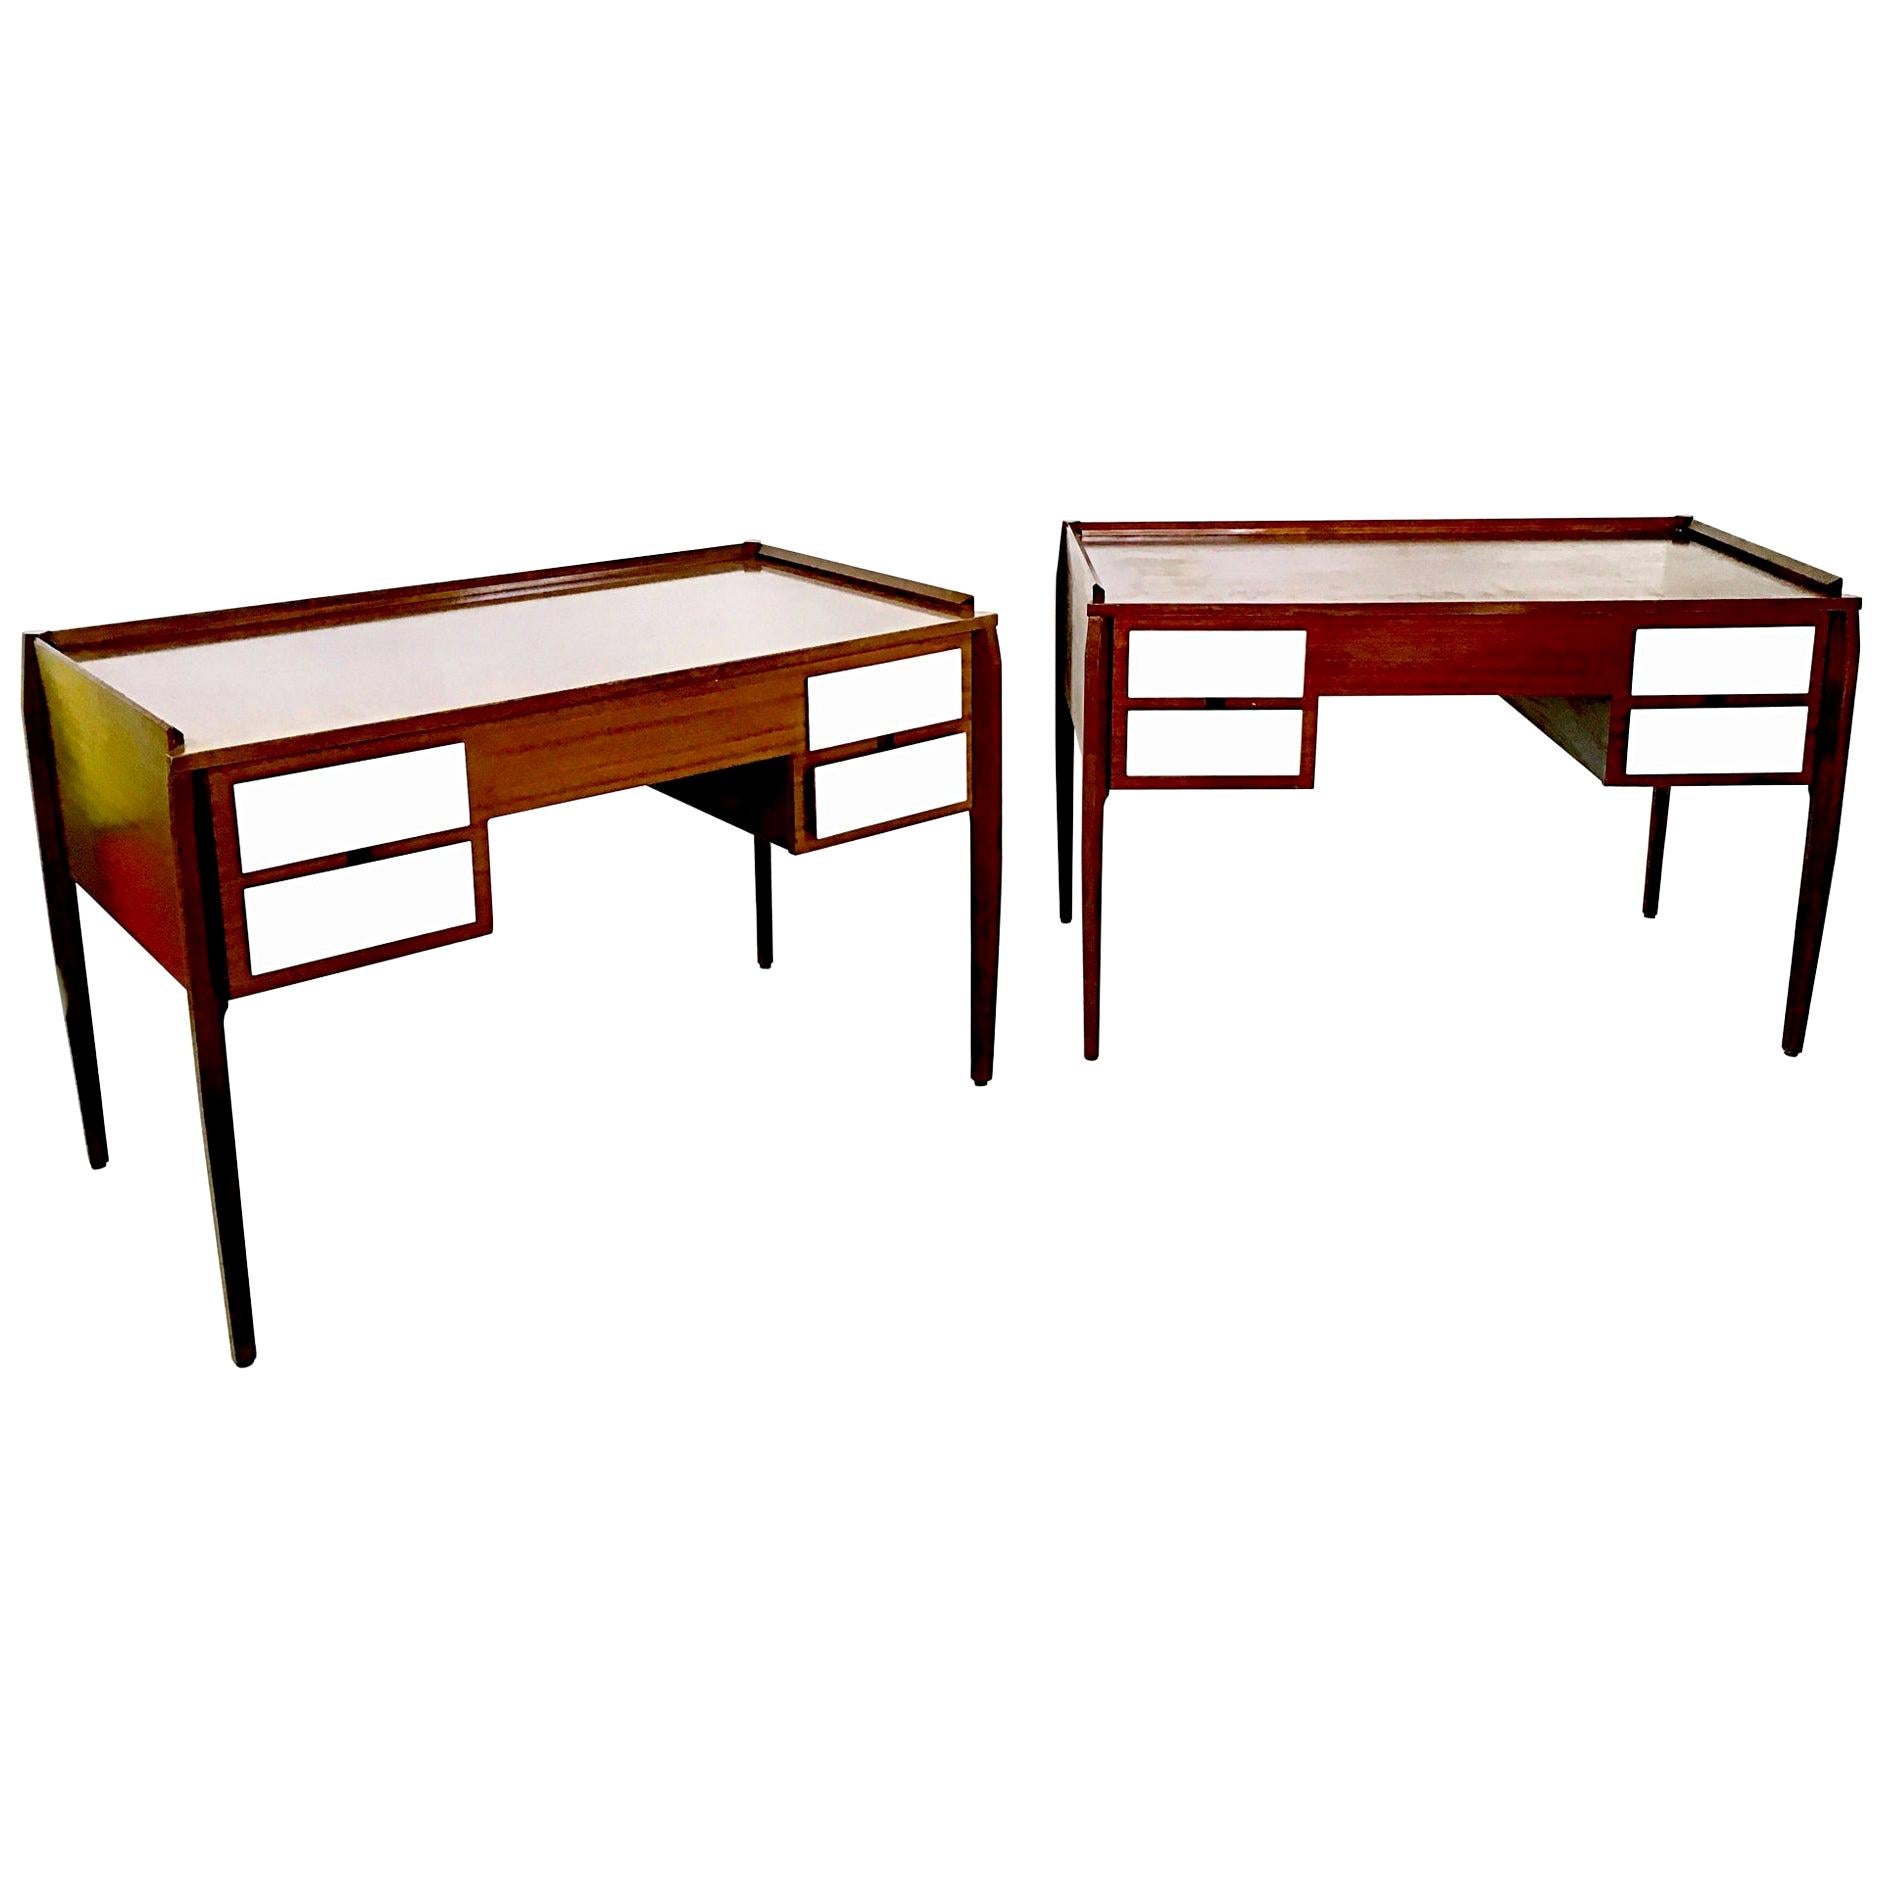 Pair of Vintage Wooden Writing Desks in the Style of Gio Ponti, Italy